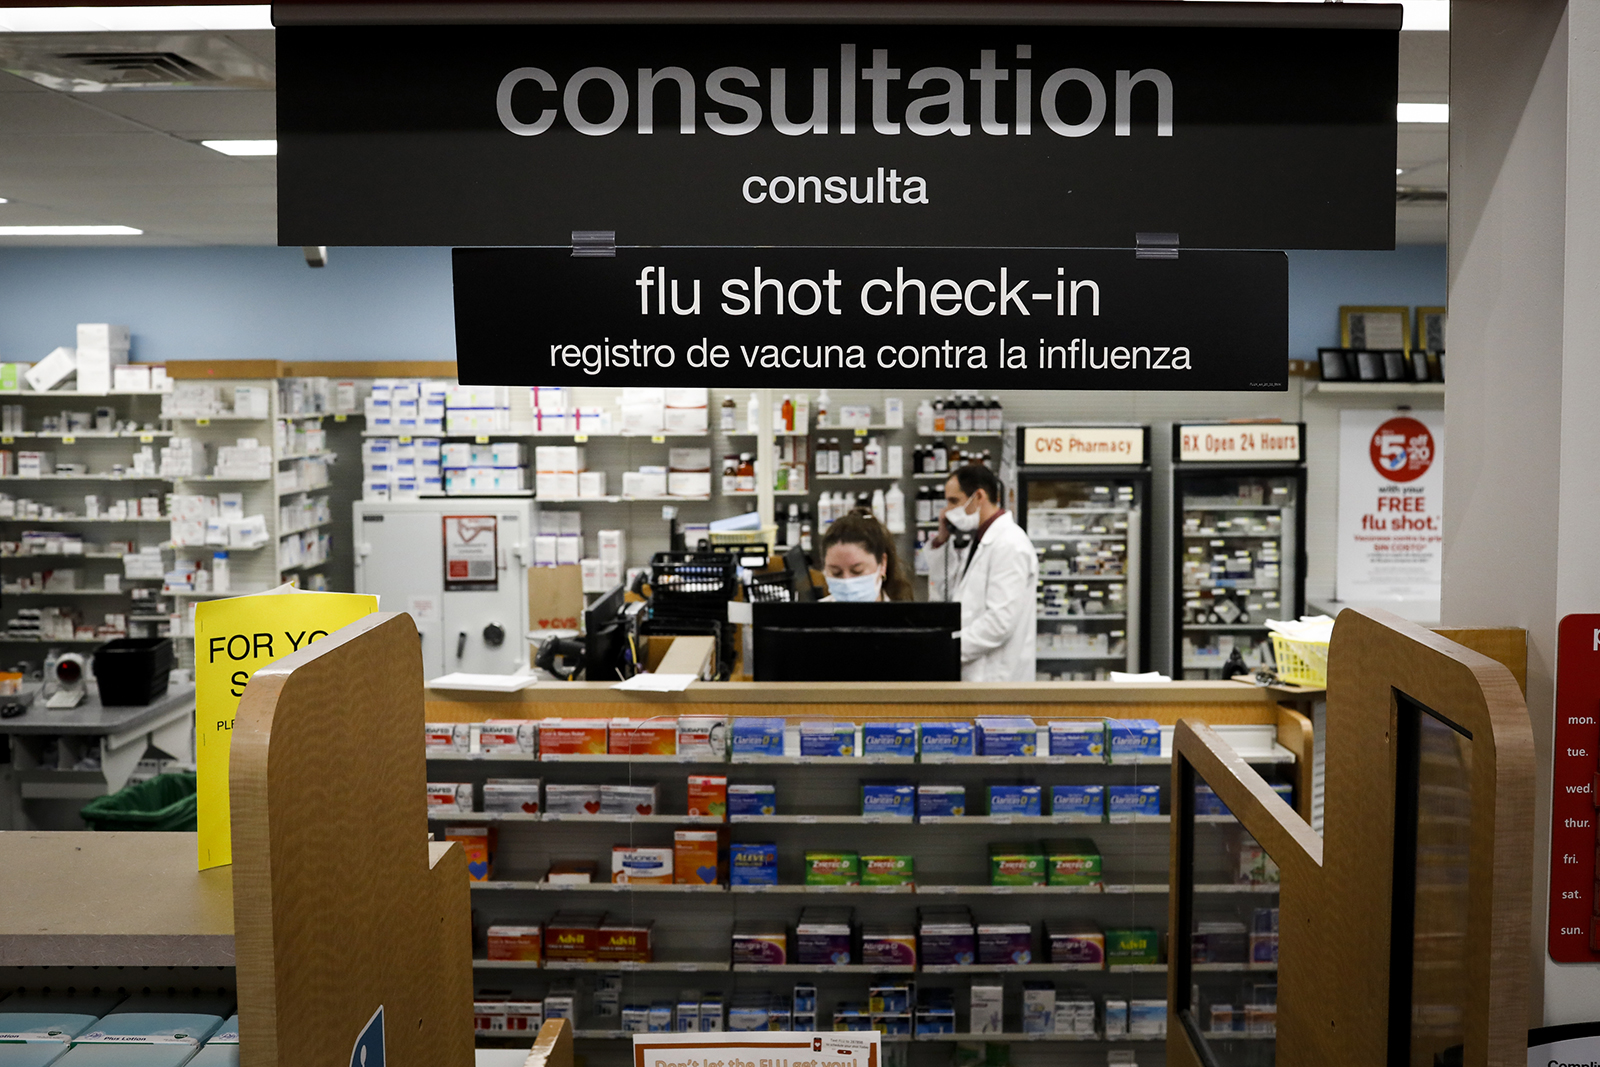 A "flu shot check-in" sign is displayed at a CVS Pharmacy in Miami, on September 30, 2020.